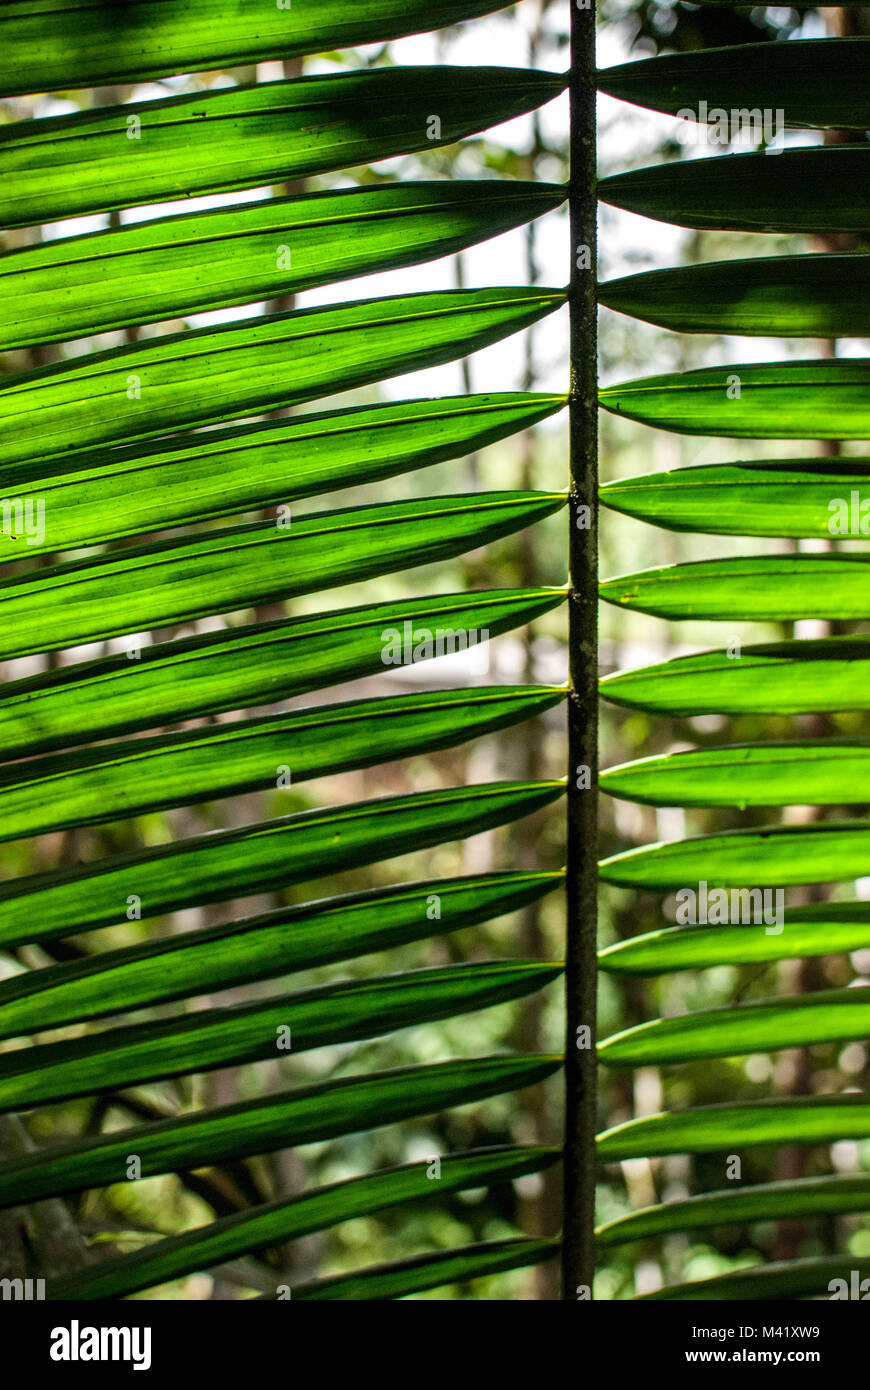 A close-up photo of the detail of the leaves of a plant illuminated by sunlight in the Amazon jungle Stock Photo